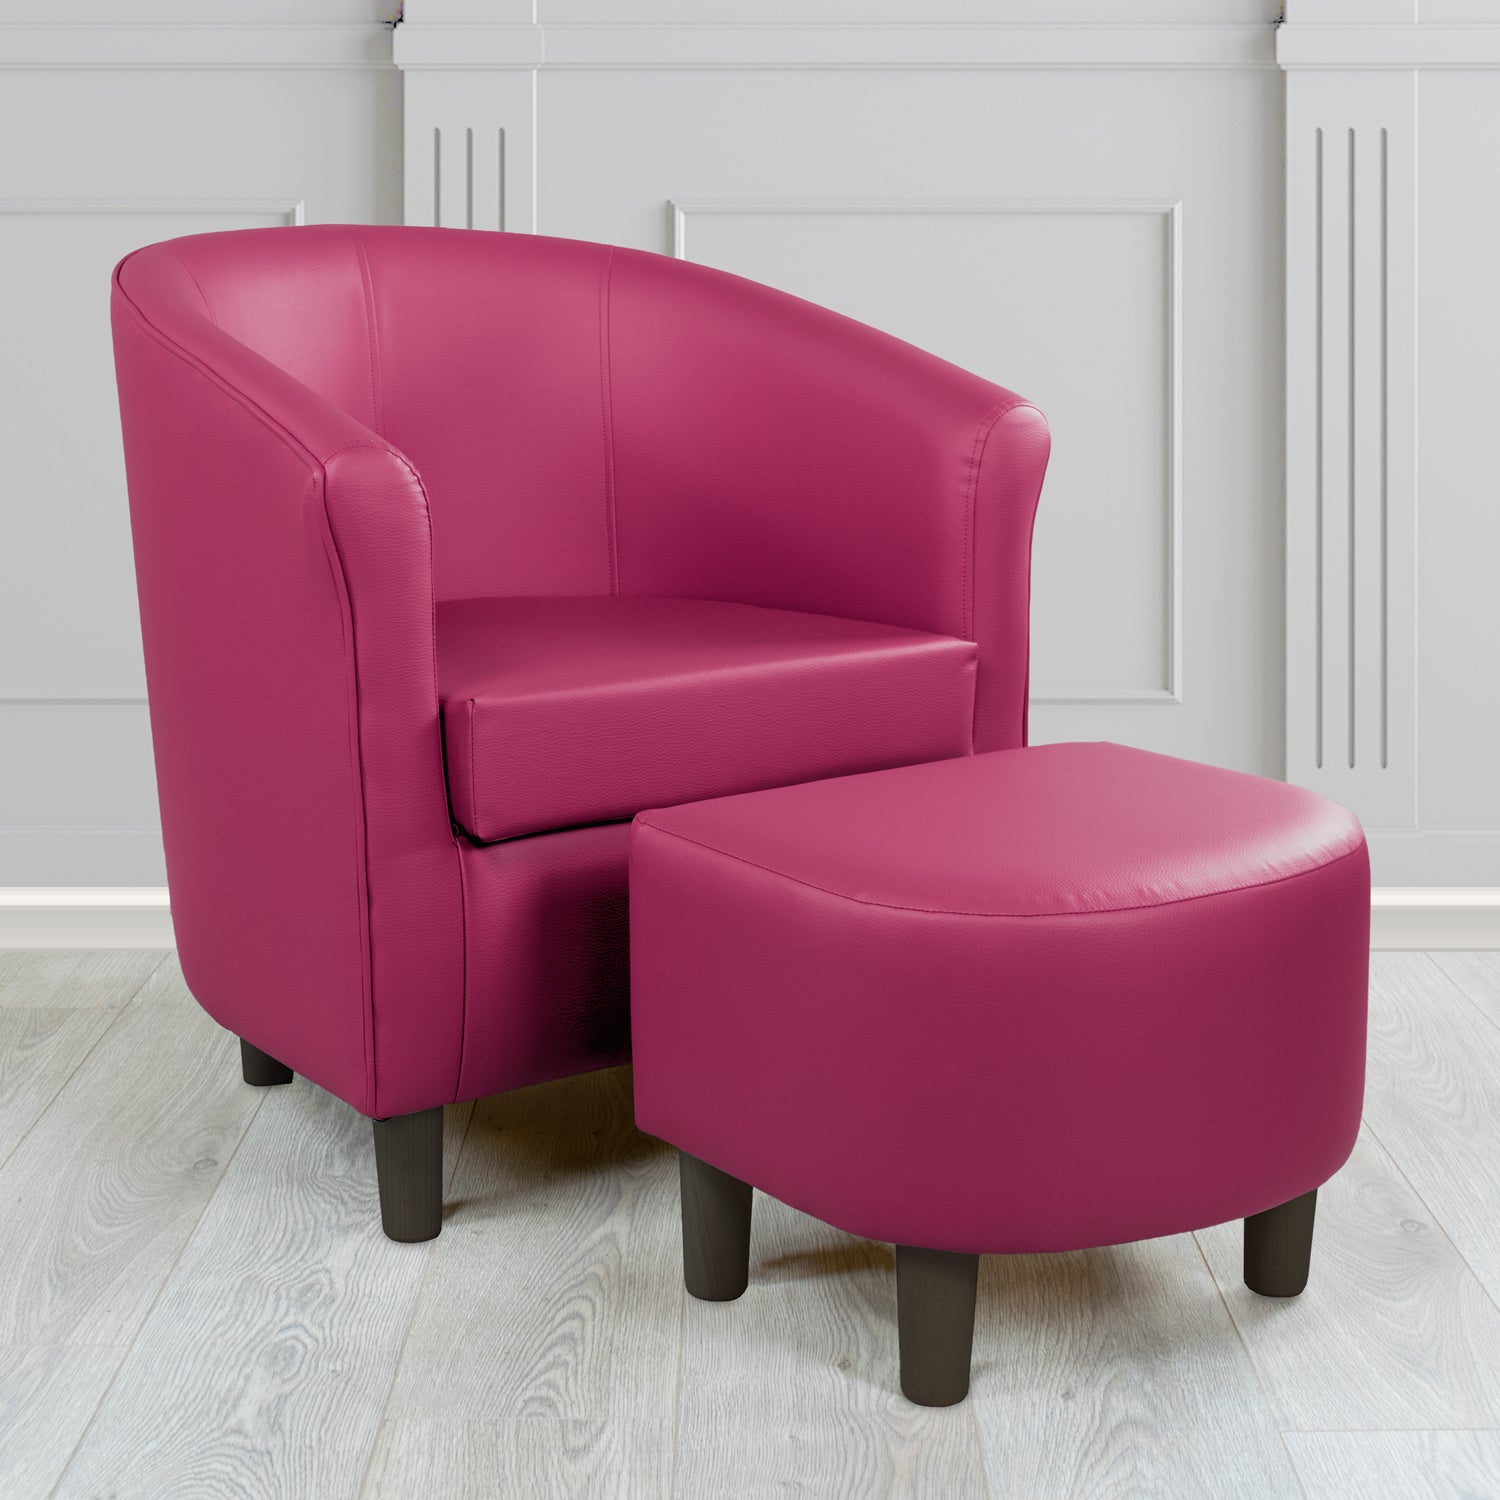 Tuscany Just Colour Raspberry Crush Faux Leather Tub Chair with Footstool Set - The Tub Chair Shop